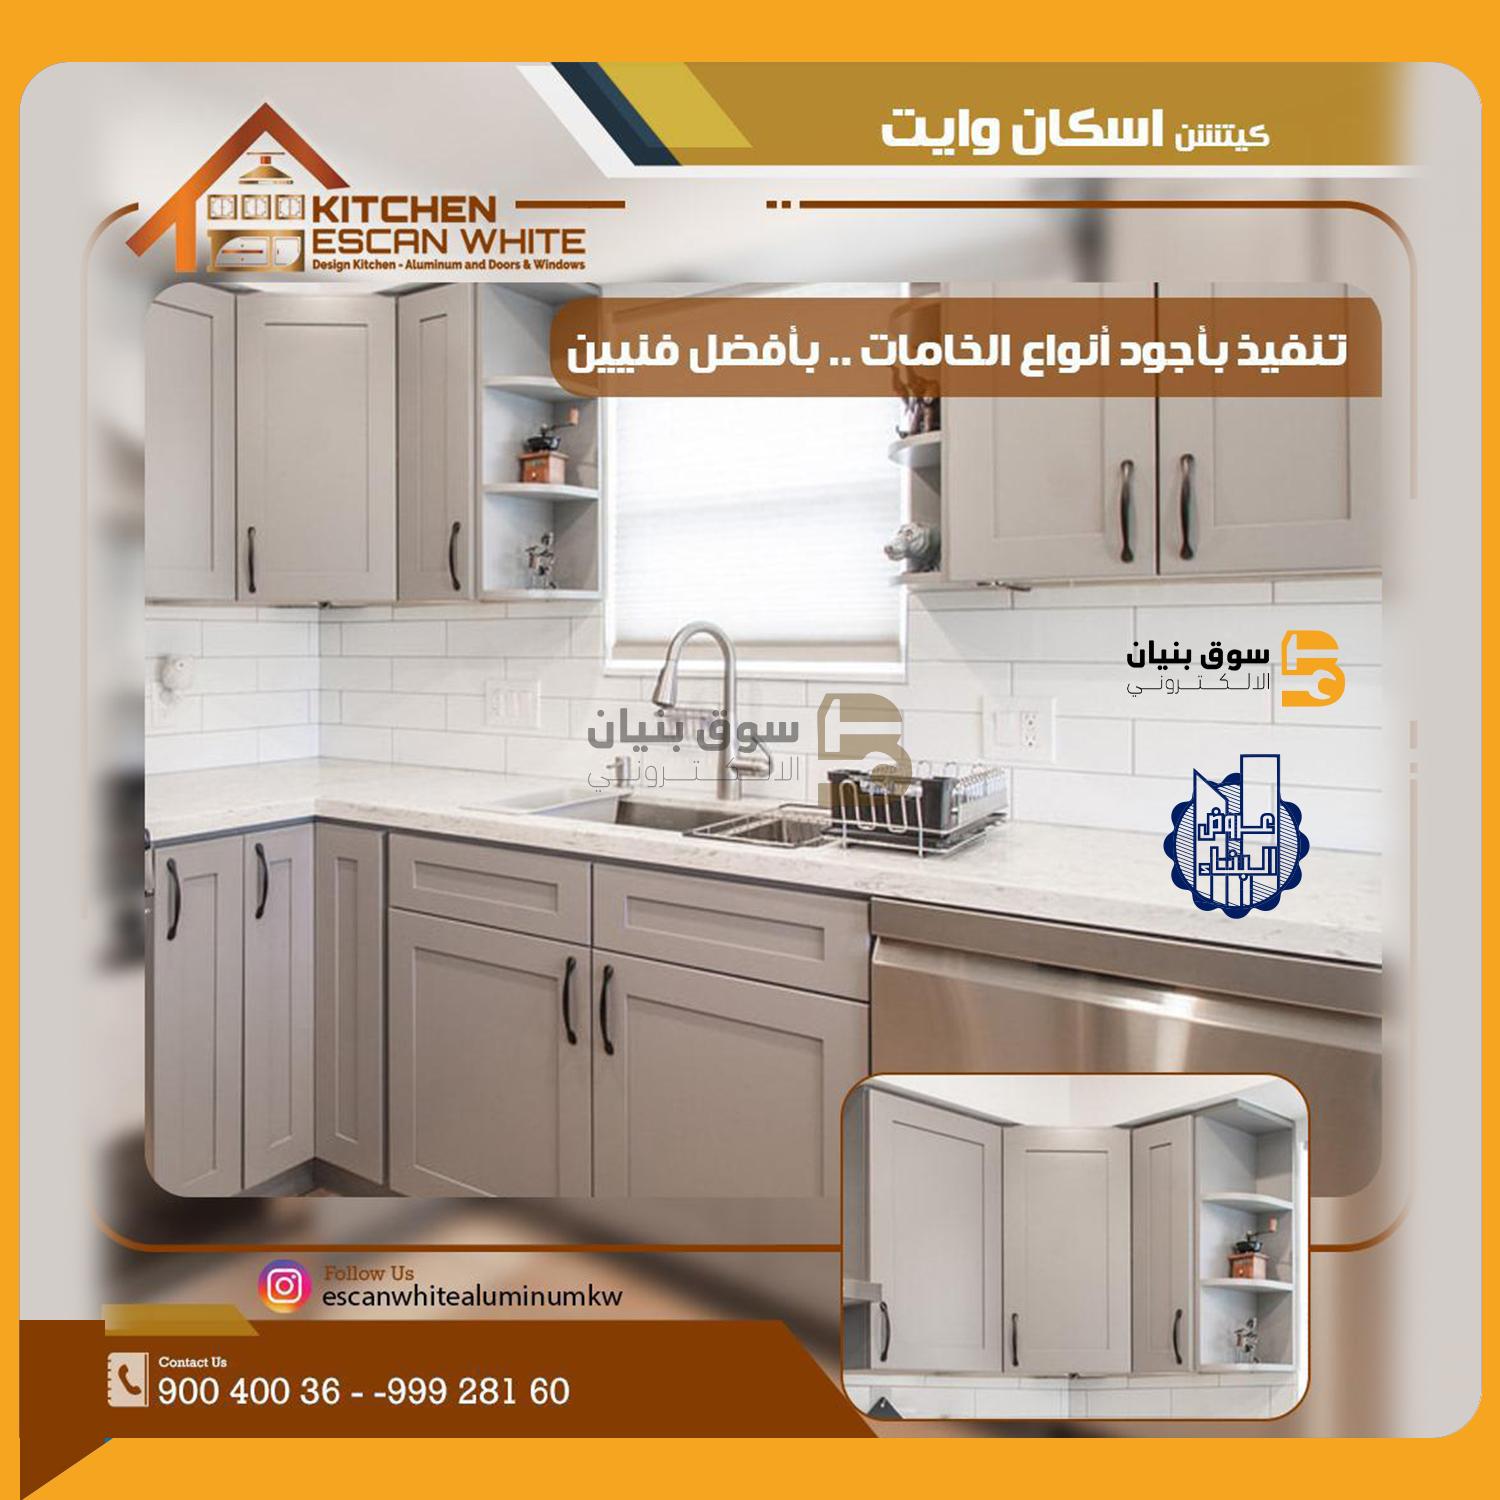 kitchen escan white for design kitchens and aluminum doors and windows company